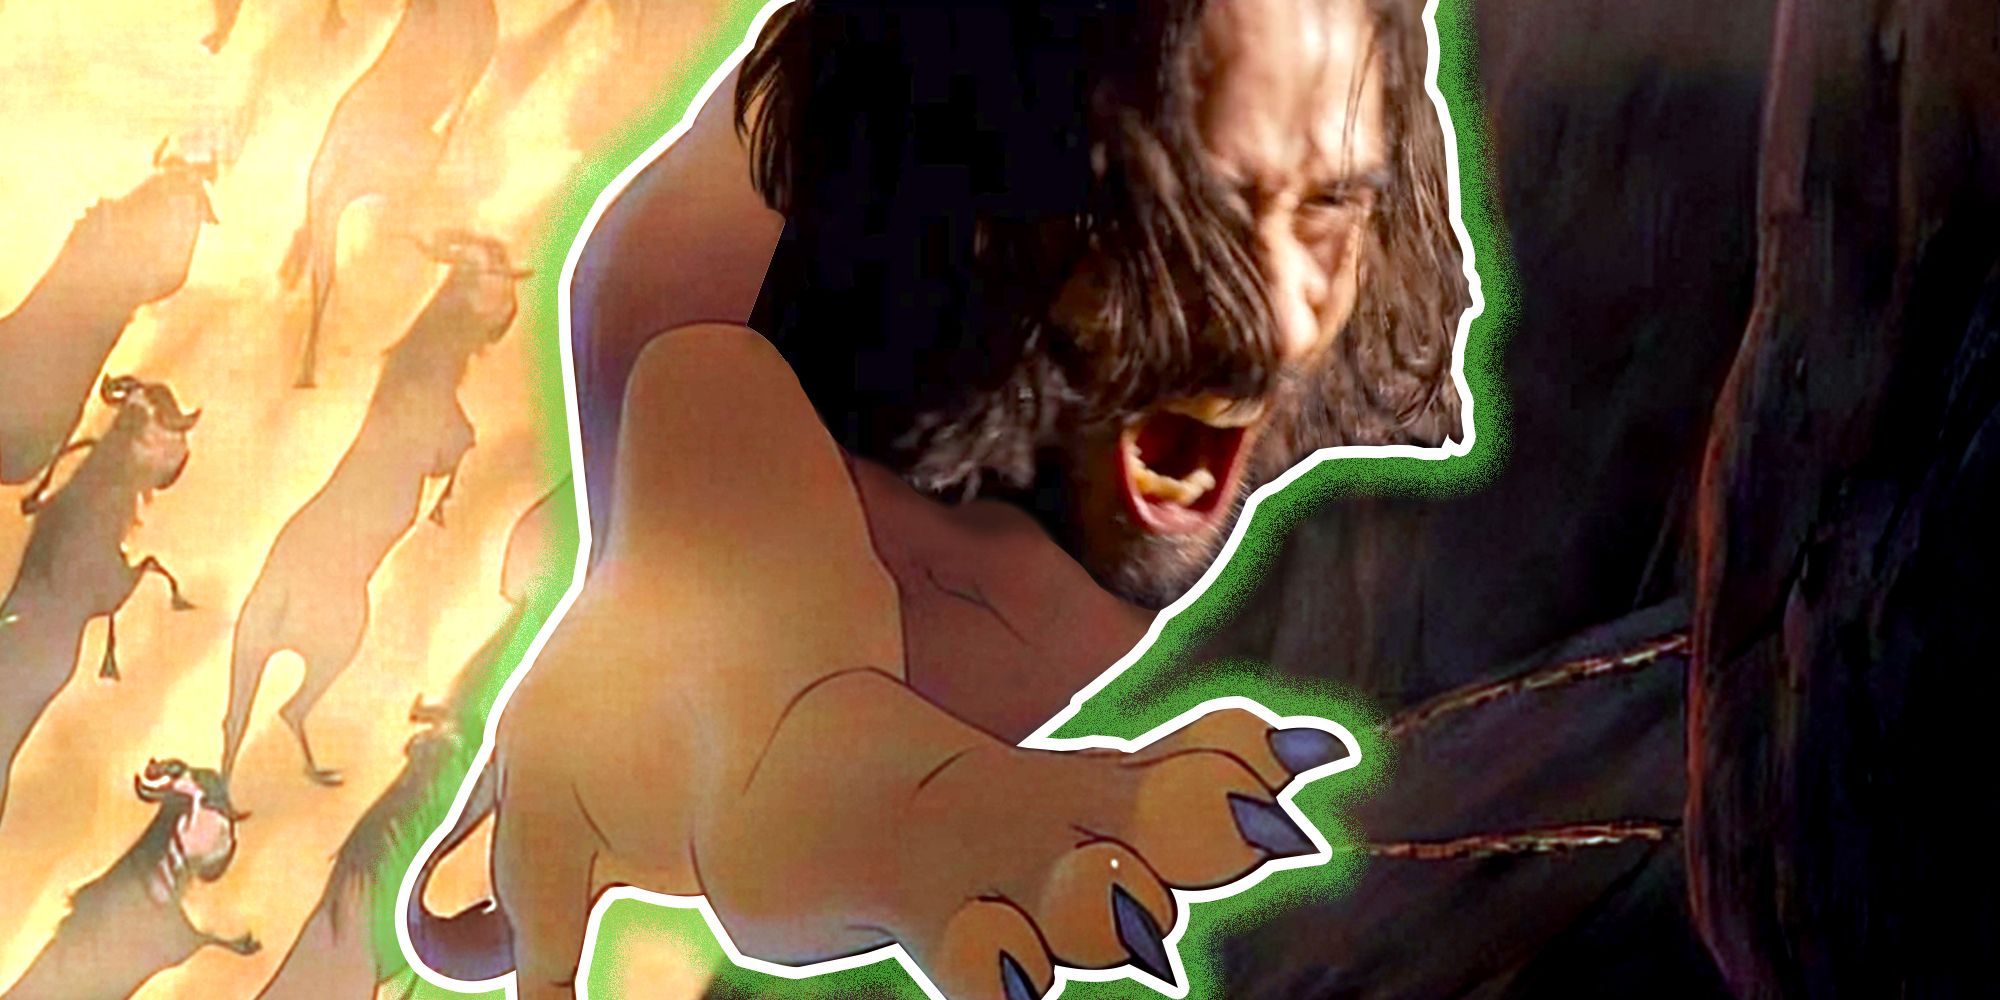 Mufasa falling into the gorge as the stampede occurs, but with Keanu Reeves' Neo in The Matrix Resurrections superimposed on Mufasa's body